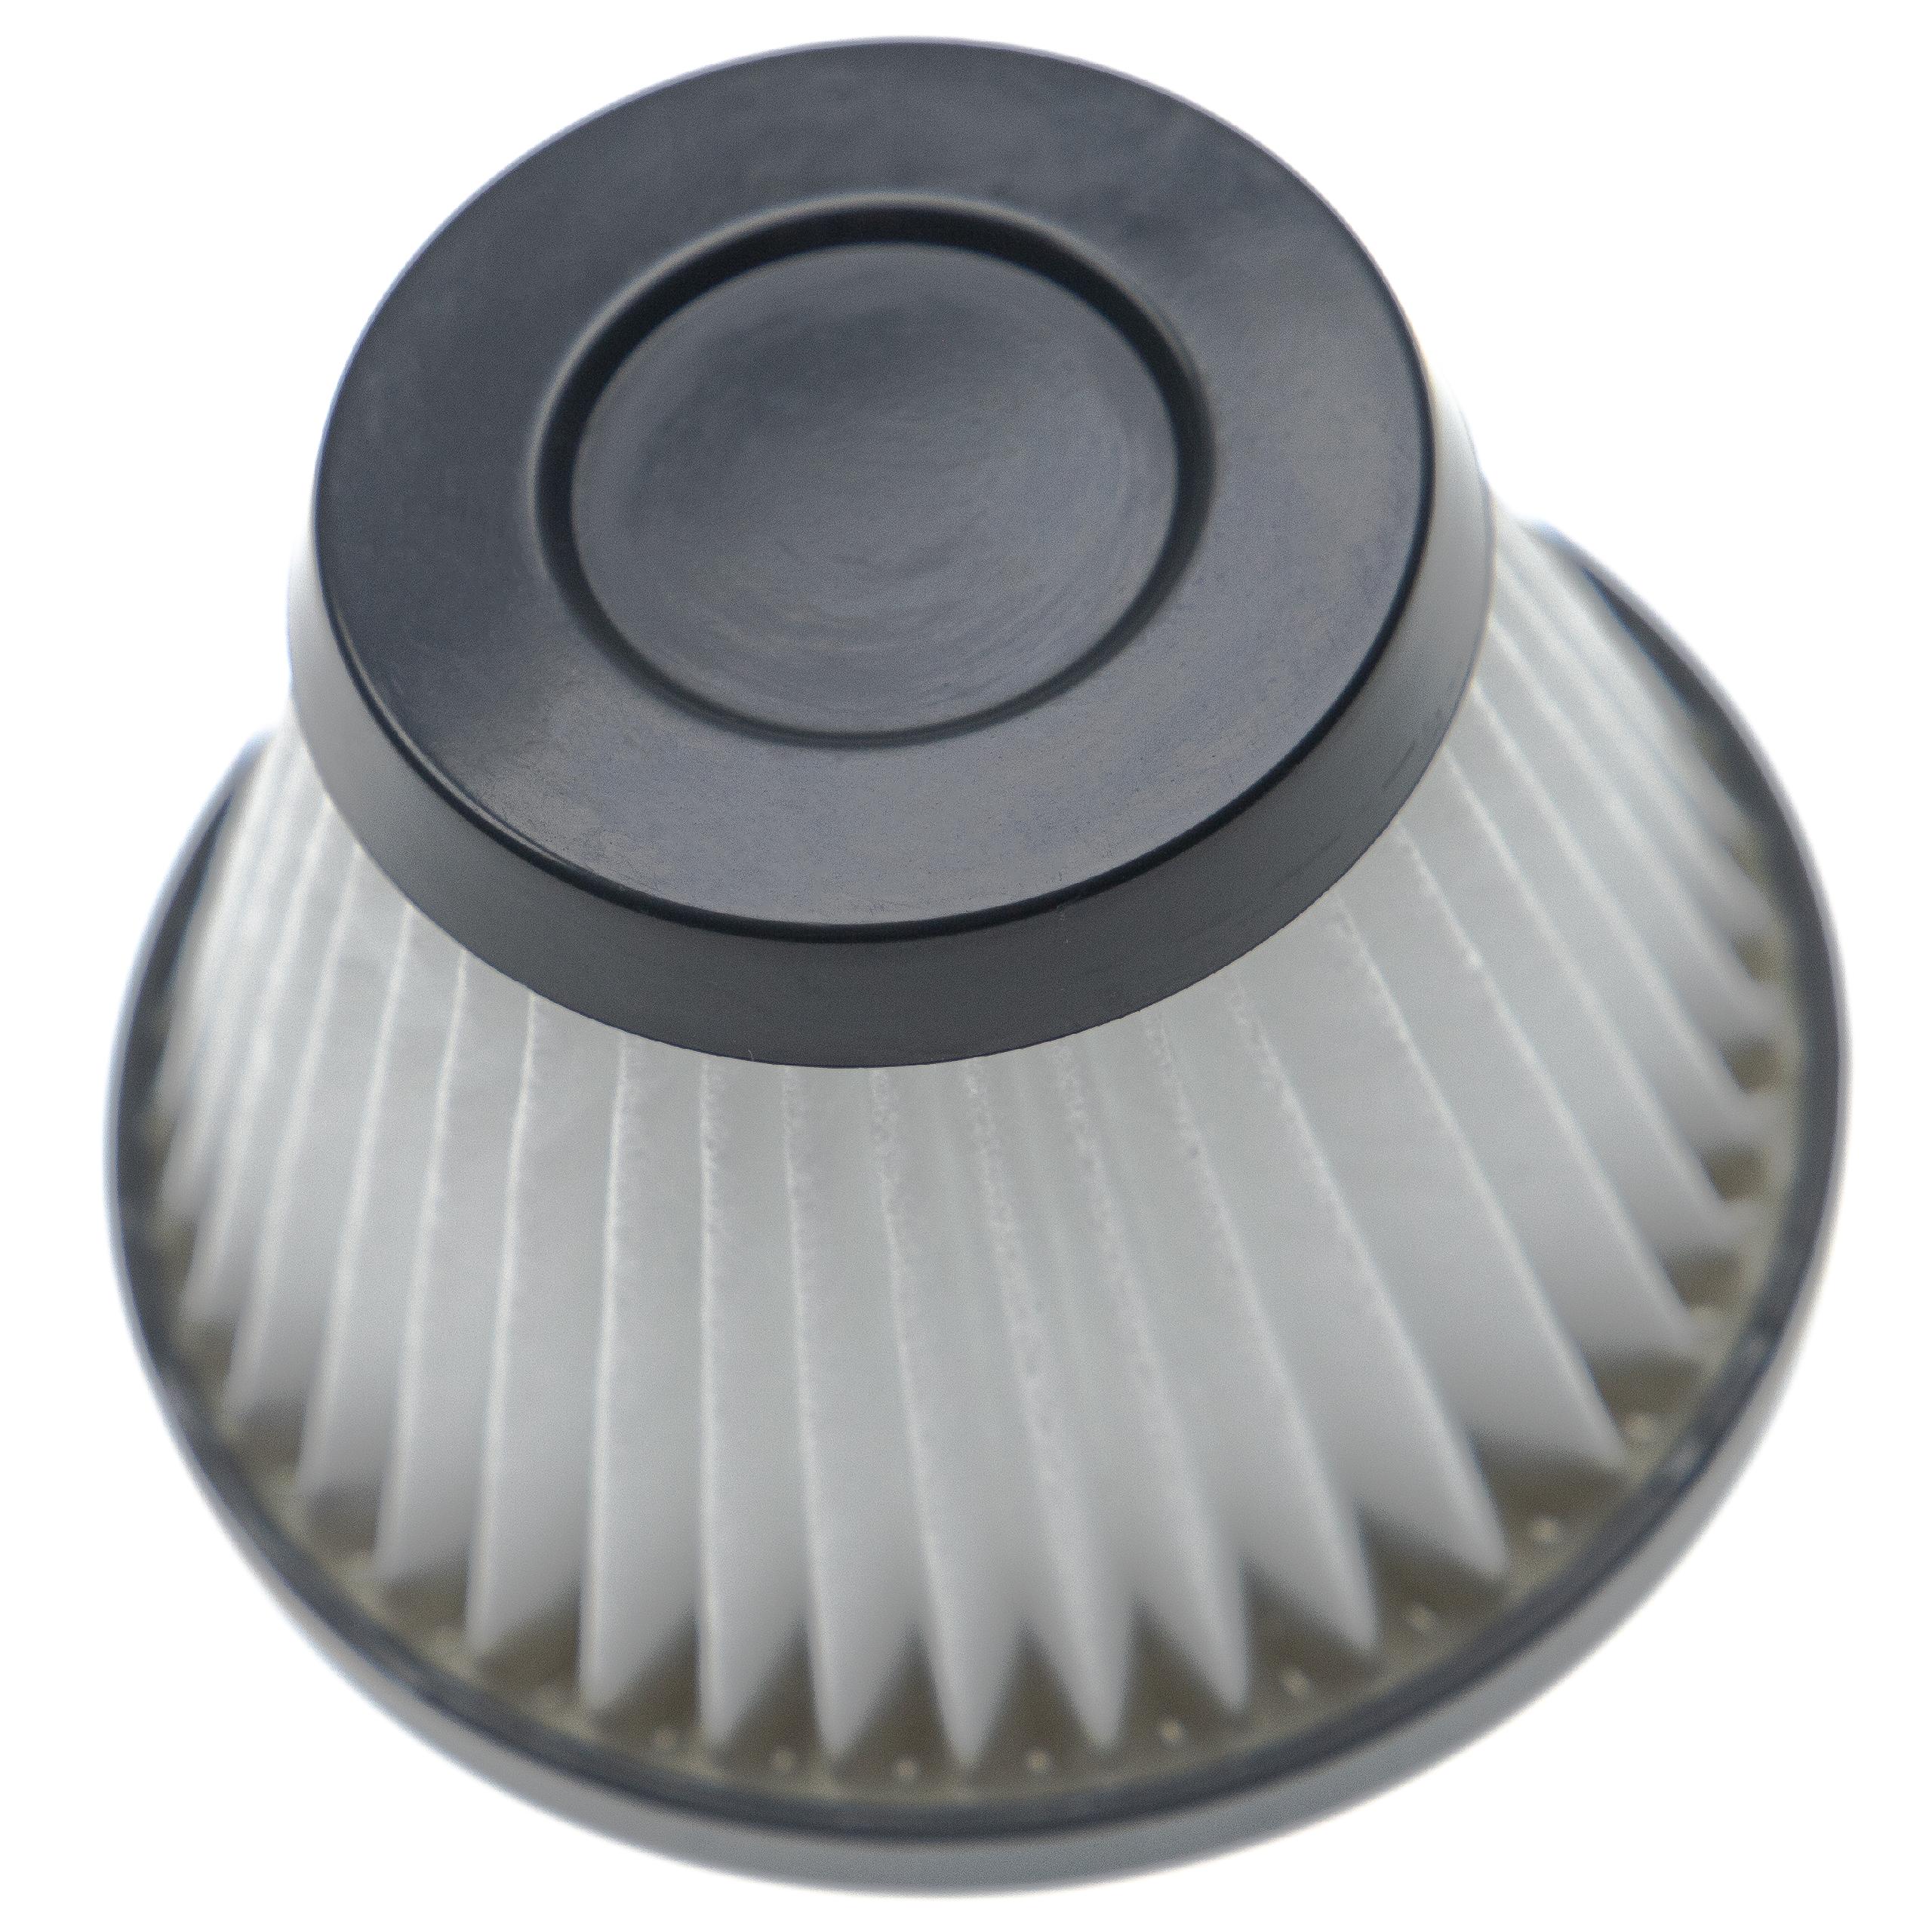 1x HEPA filter replaces Philips 432200493471, CRP788, CRP788/01 for Philips Vacuum Cleaner